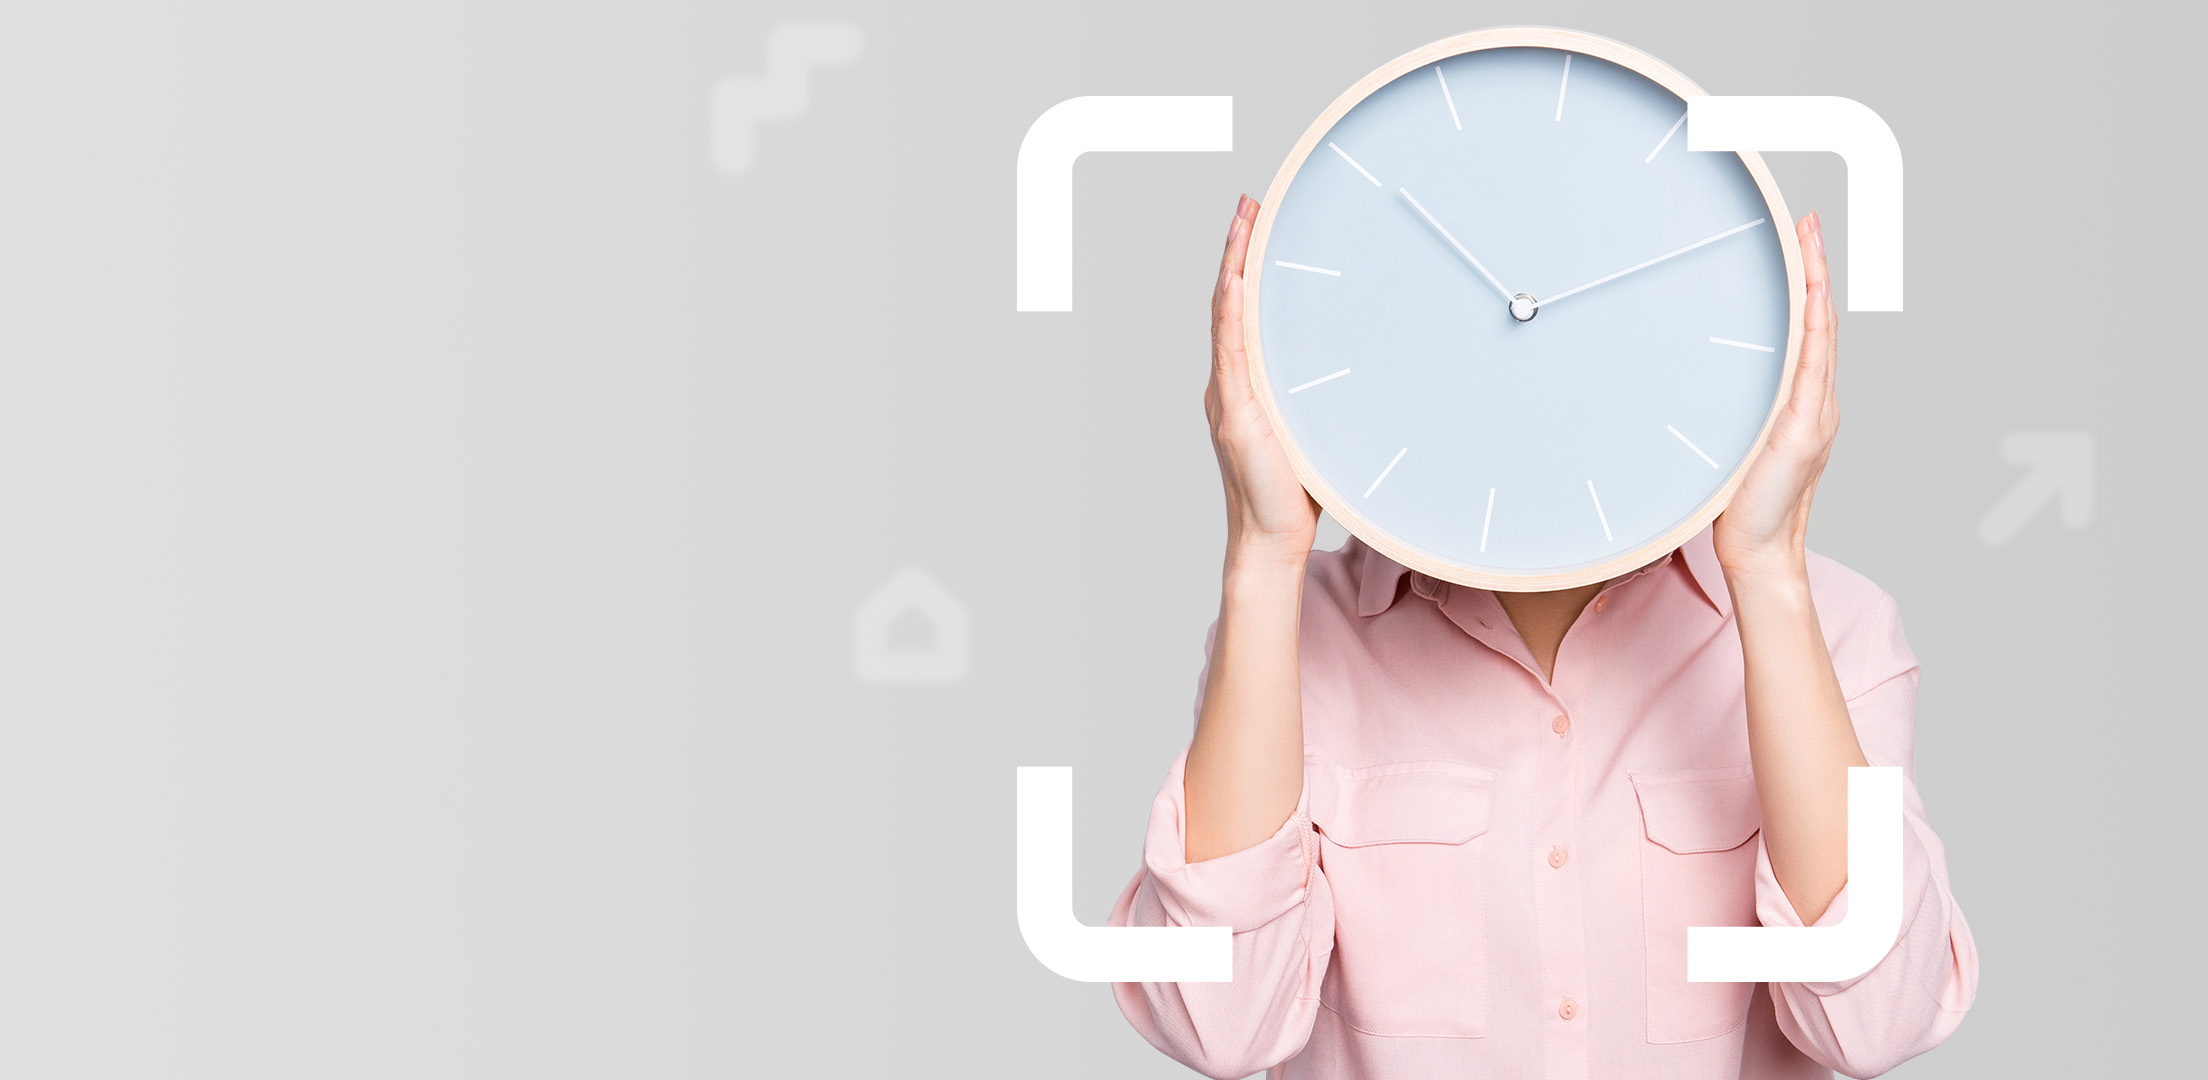 Female in pink long sleeved shirt holding simple clock face in front of her face